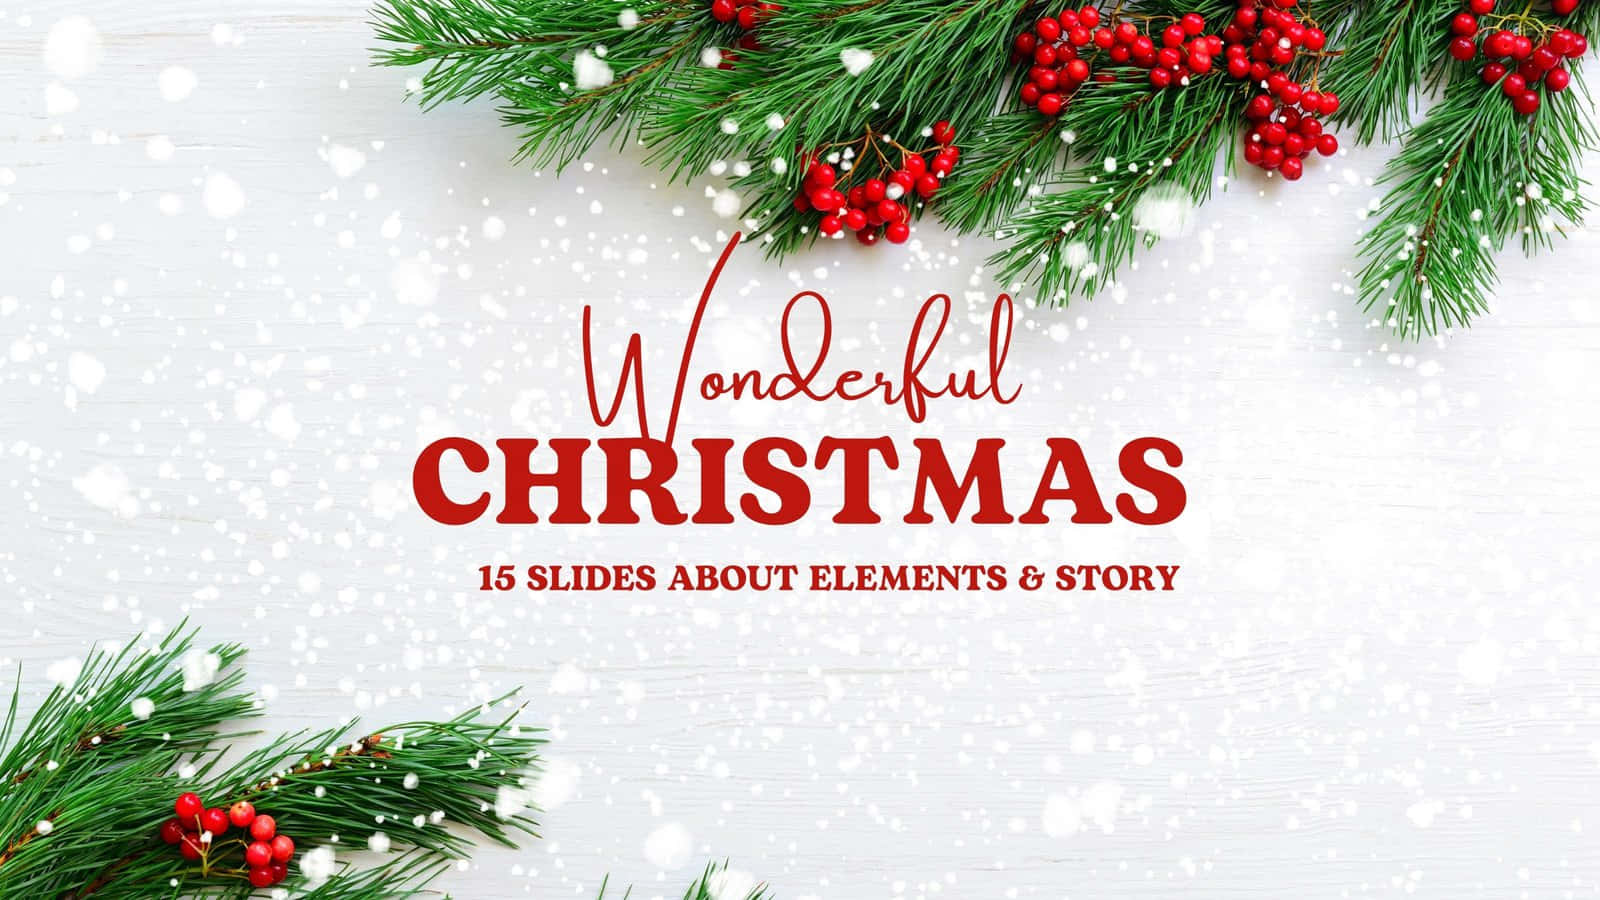 A beautiful Christmas powerpoint presentation perfect for the holiday season.